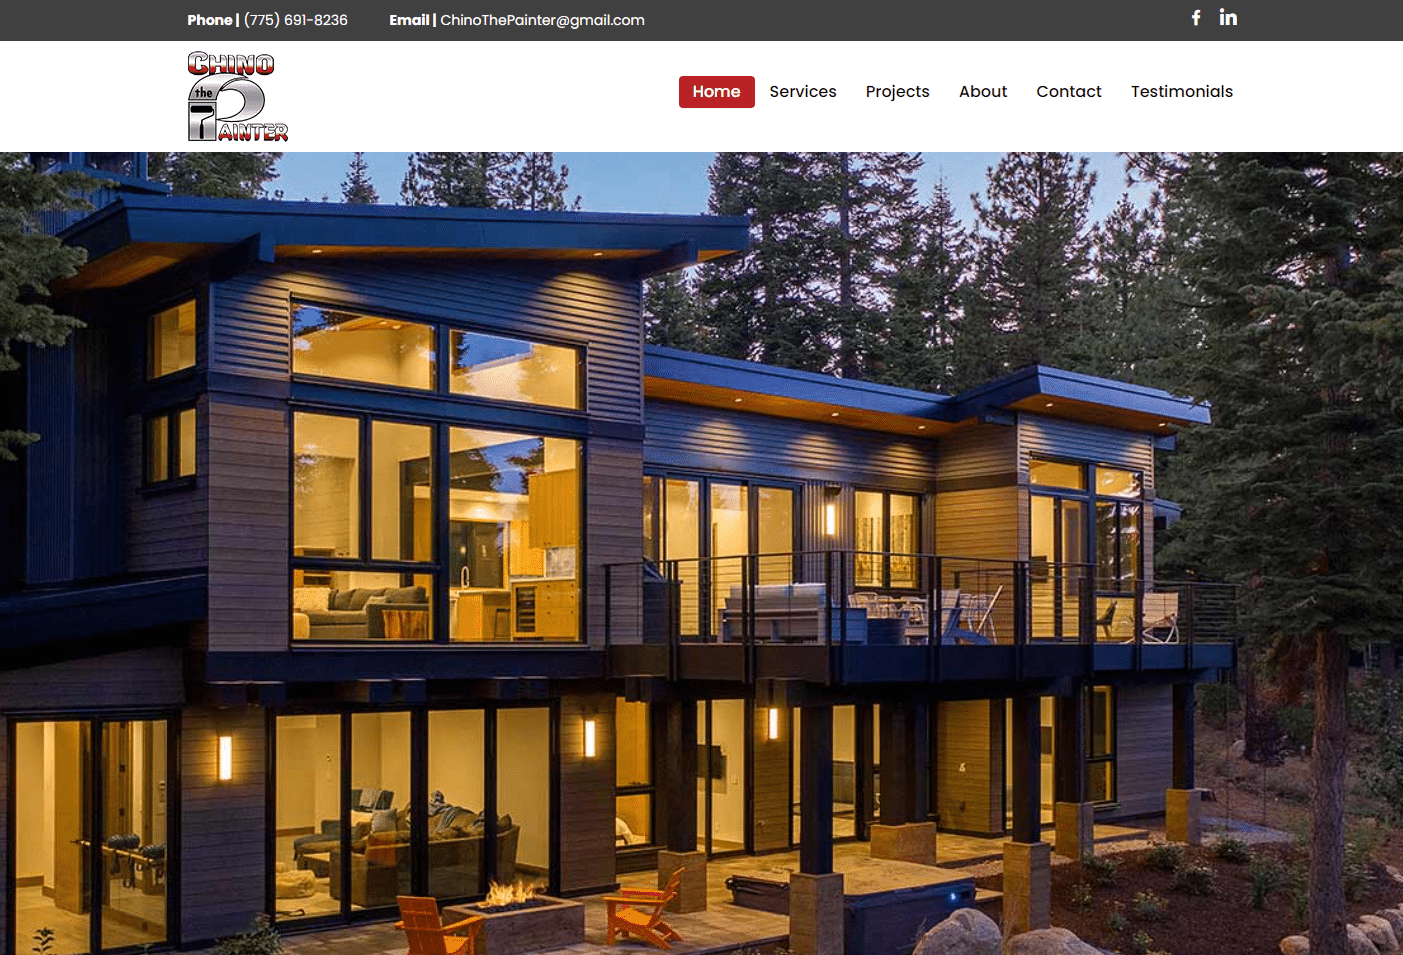 image of tahoe truckee painting staining company new website design project